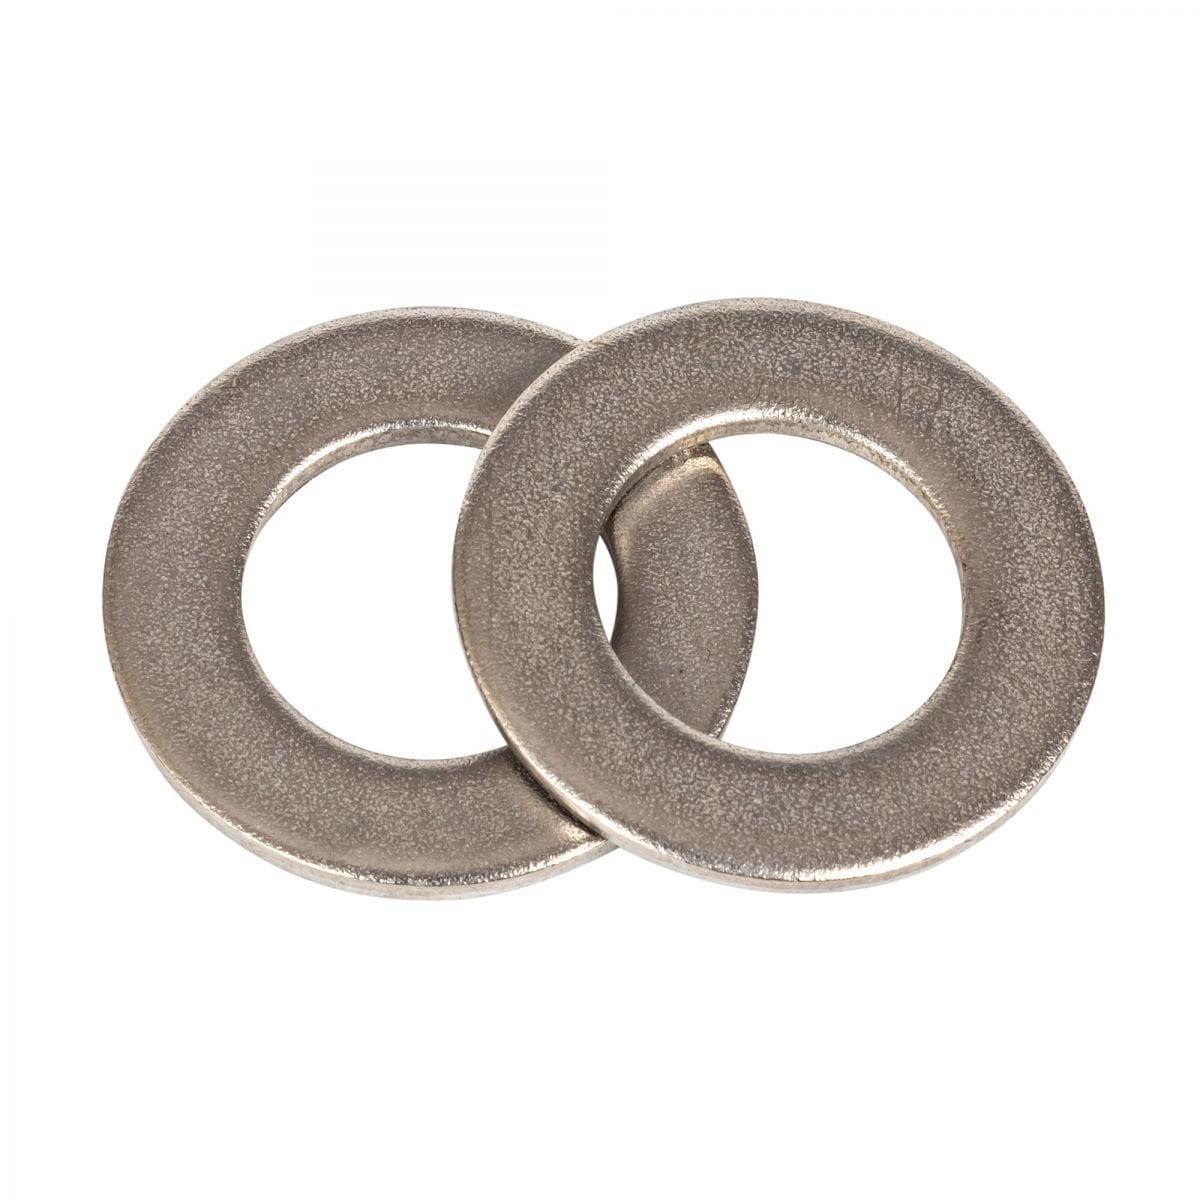 ASTM F436 Washer, SS 304, 1 Inch, for Pipeline Fastening